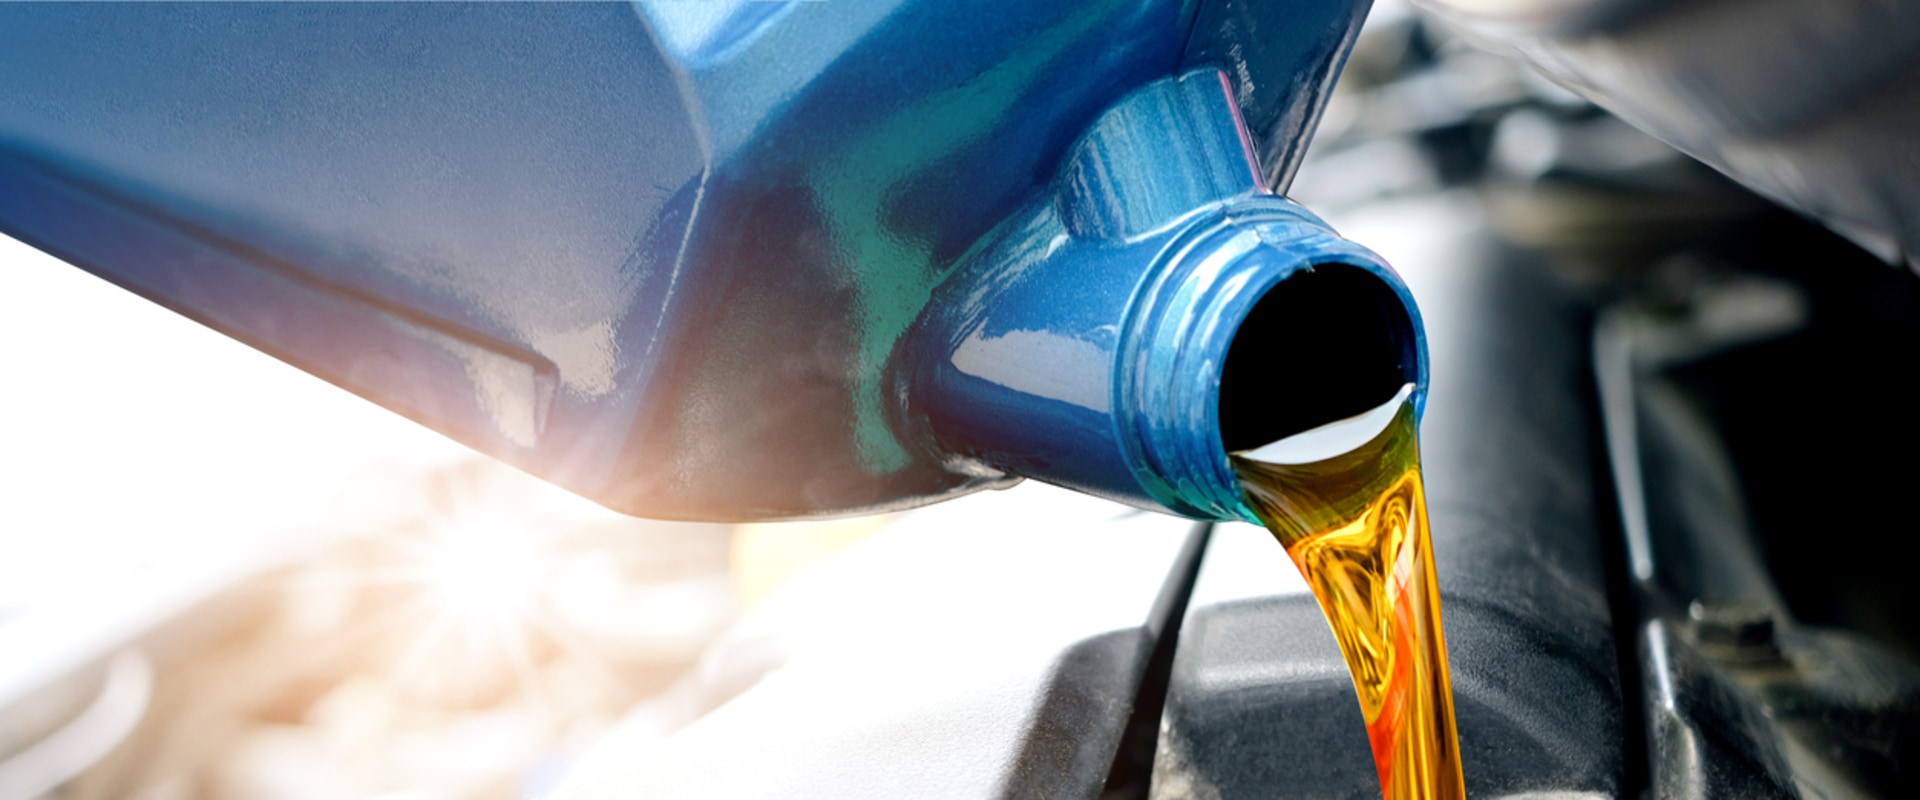 Oil Change Services Near Me: Everything You Need to Know